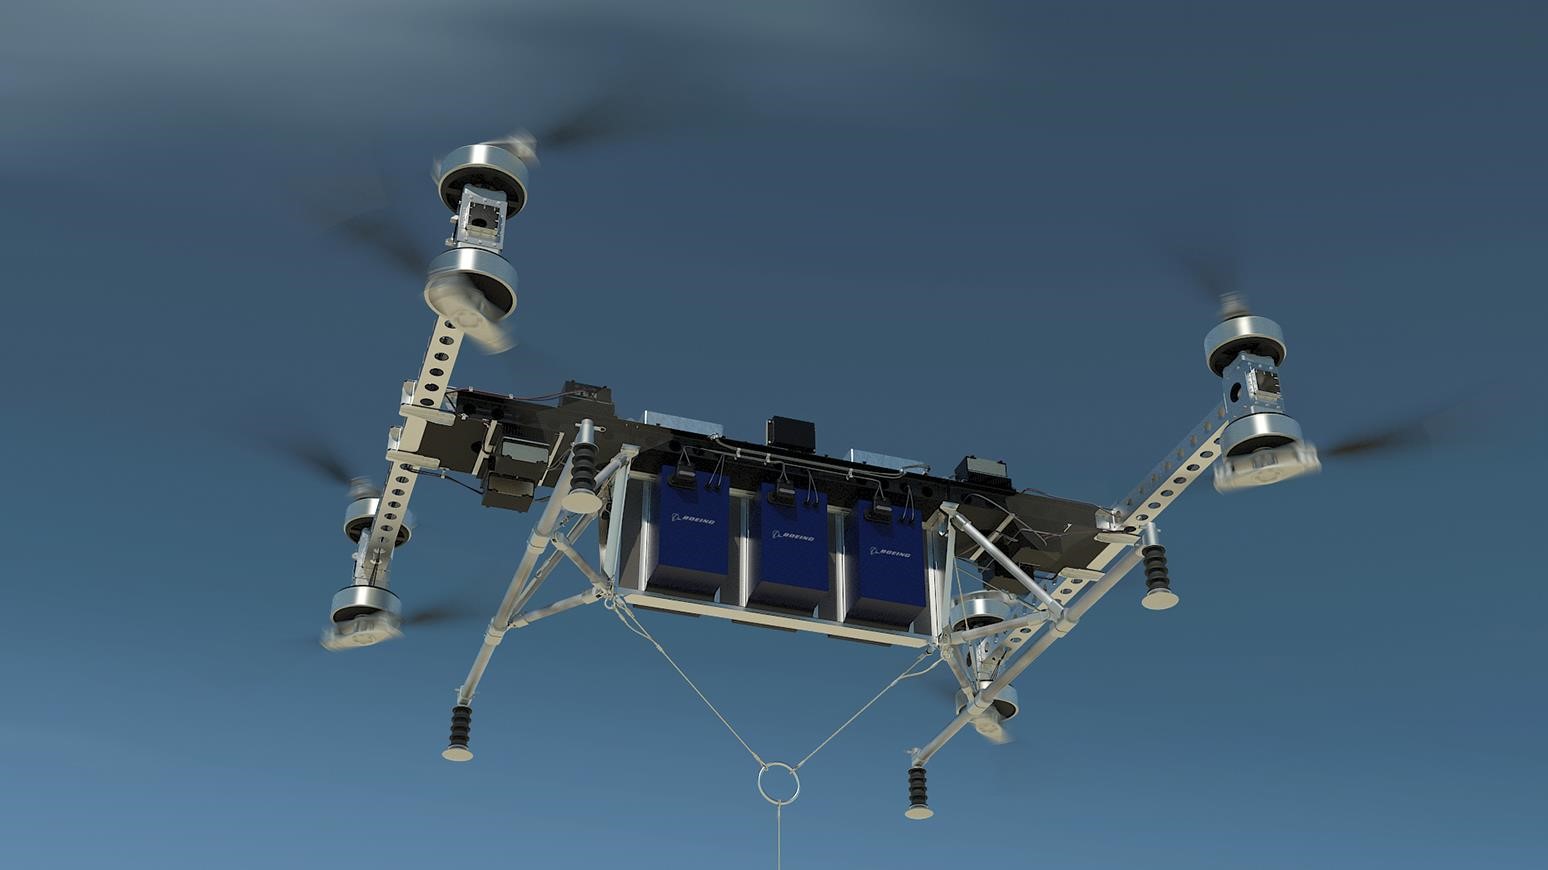 Boeing Debuts Prototype HeavyDuty Drone Vehicle For Future Cargo